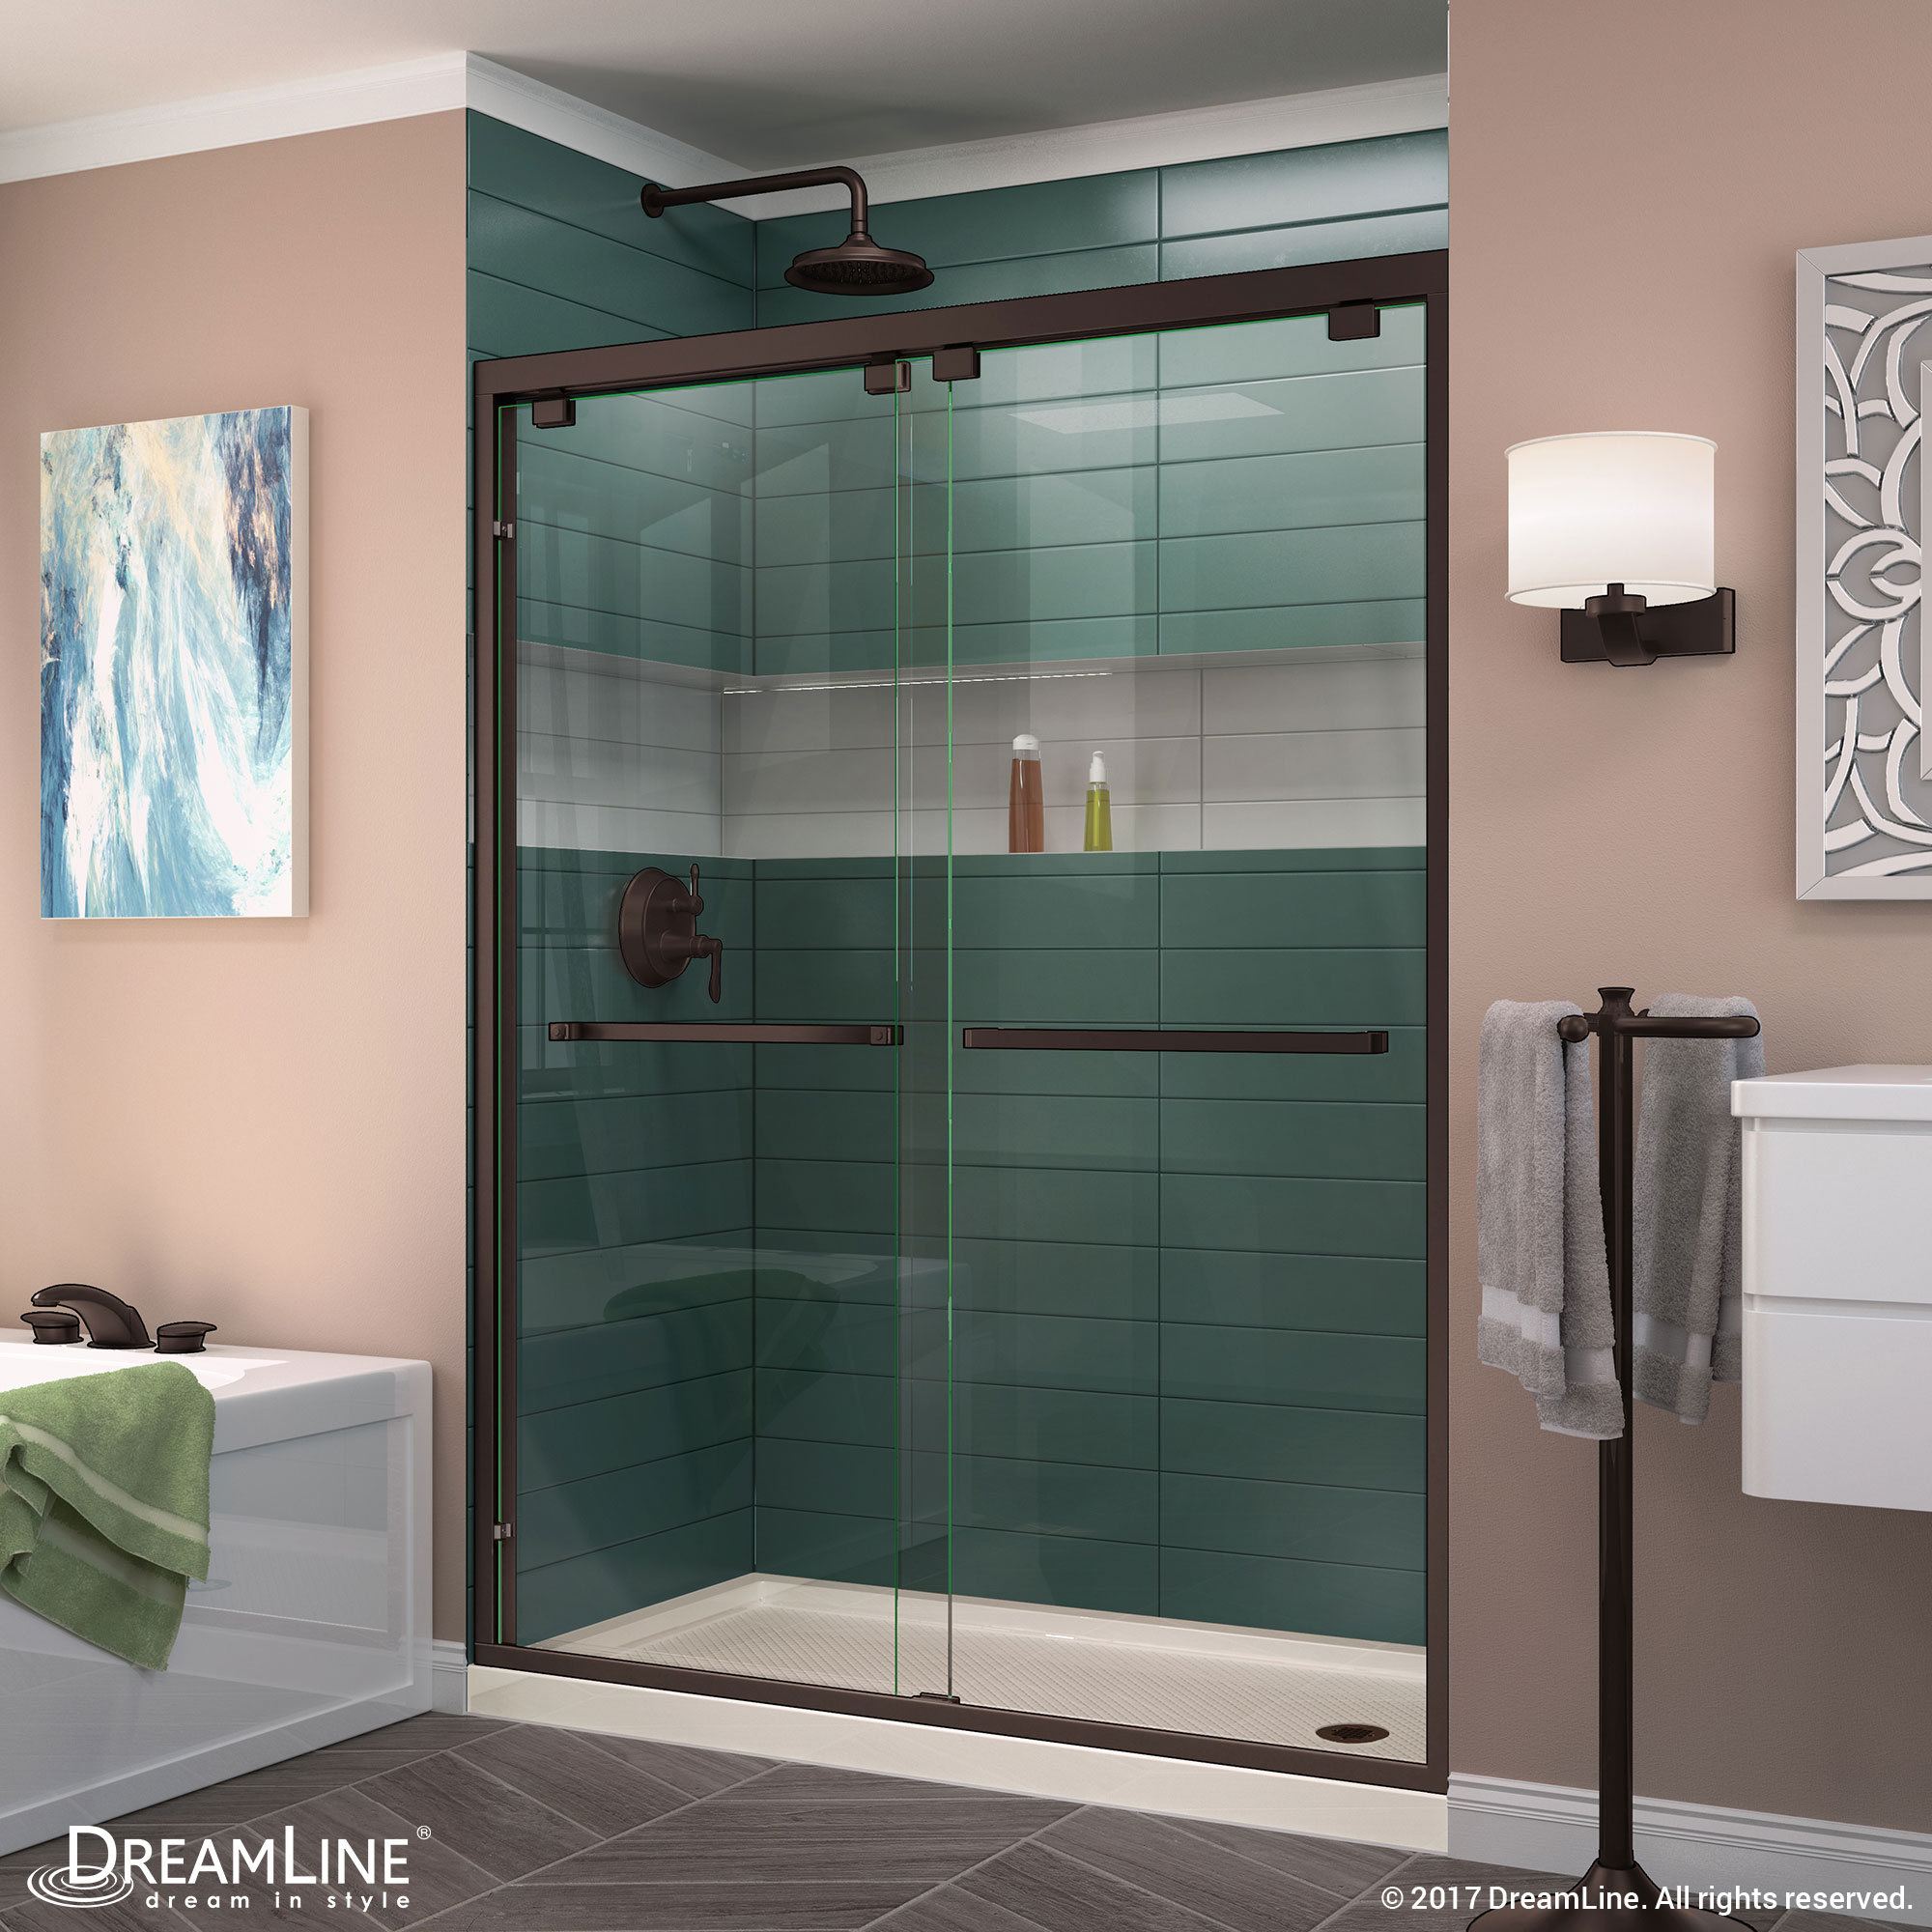 DreamLine Encore 32 in. D x 60 in. W x 78 3/4 in. H Bypass Shower Door in Brushed Nickel and Right Drain Biscuit Base Kit